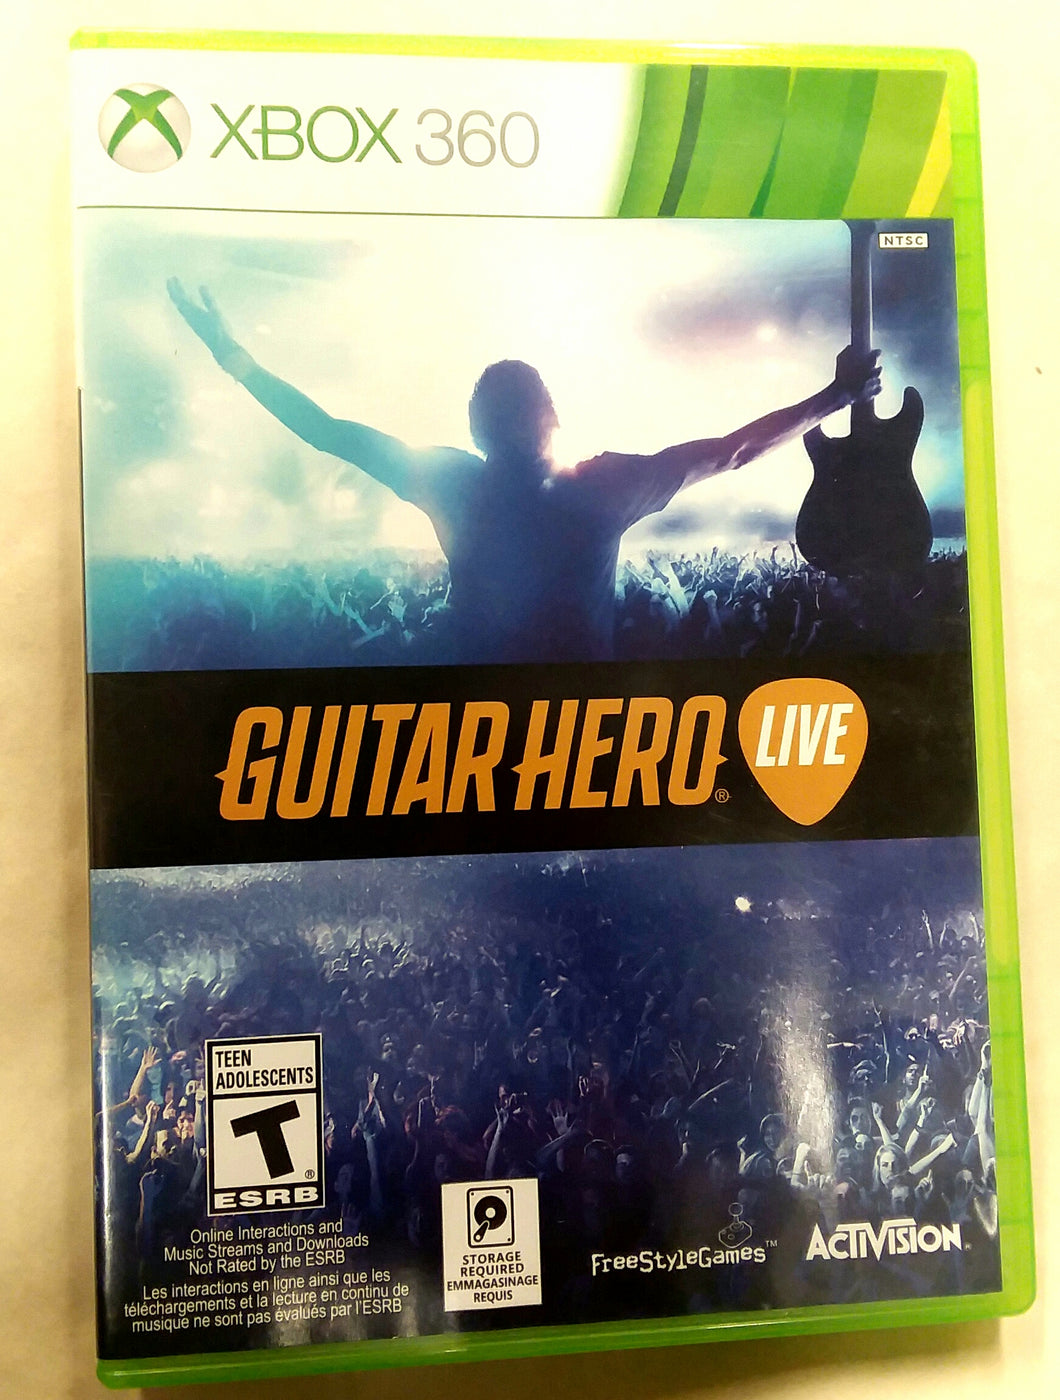 XBOX 360 Replacement Game Case for Guitar Hero Live No Game Included